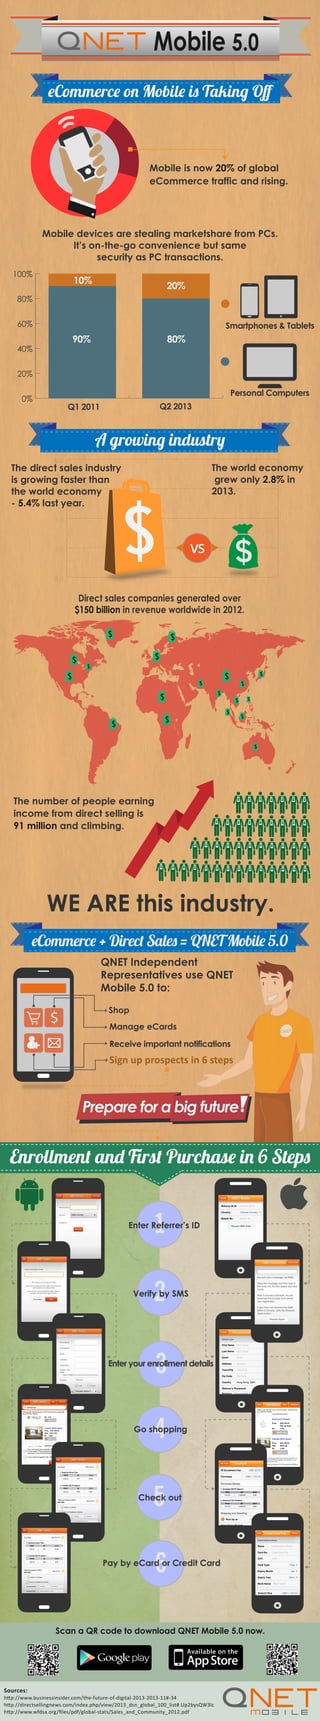 Mobile 5.0
eCommerce on Mobile is Taking Oﬀ

Mobile is now 20% of global
eCommerce traffic and rising.

Mobile devices are stealing marketshare from PCs.
It’s on-the-go convenience but same
security as PC transactions.
100%

10%

20%

80%
60%

Smartphones & Tablets

80%

90%

40%
20%

Personal Computers

0%

Q2 2013

Q1 2011

A growing industry
6.0

The direct sales industry
is growing faster than
the world4.5
economy
- 5.4% last year.
3.0

1.5

The world economy
grew only 2.8% in
2013.

$

$

vs

0.0

Direct sales companies generated over
$150 billion in revenue worldwide in 2012.
$
$

$
$

$

$

$

$

$

$

$

$

$

$

$

$

$

$

$

The number of people earning
income from direct selling is
91 million and climbing.

WE ARE this industry.
eCommerce + Direct Sales = QNET Mobile 5.0
QNET Independent
Representatives use QNET
Mobile 5.0 to:

$

Shop
Manage eCards
Receive important notifications

Sign up prospects in 6 steps

Prepare for a big future

Enrollment and First Purchase in 6 Steps

1

Enter Referrer’s ID

2

Verify by SMS

3

Enter your enrollment details

4

Go shopping

5

Check out

6

Pay by eCard or Credit Card

Scan a QR code to download QNET Mobile 5.0 now.

Sources:

http://www.businessinsider.com/the-future-of-digital-2013-2013-11#-34
http://directsellingnews.com/index.php/view/2013_dsn_global_100_list#.Up2bysQW3lc
http://www.wfdsa.org/ﬁles/pdf/global-stats/Sales_and_Community_2012.pdf

 